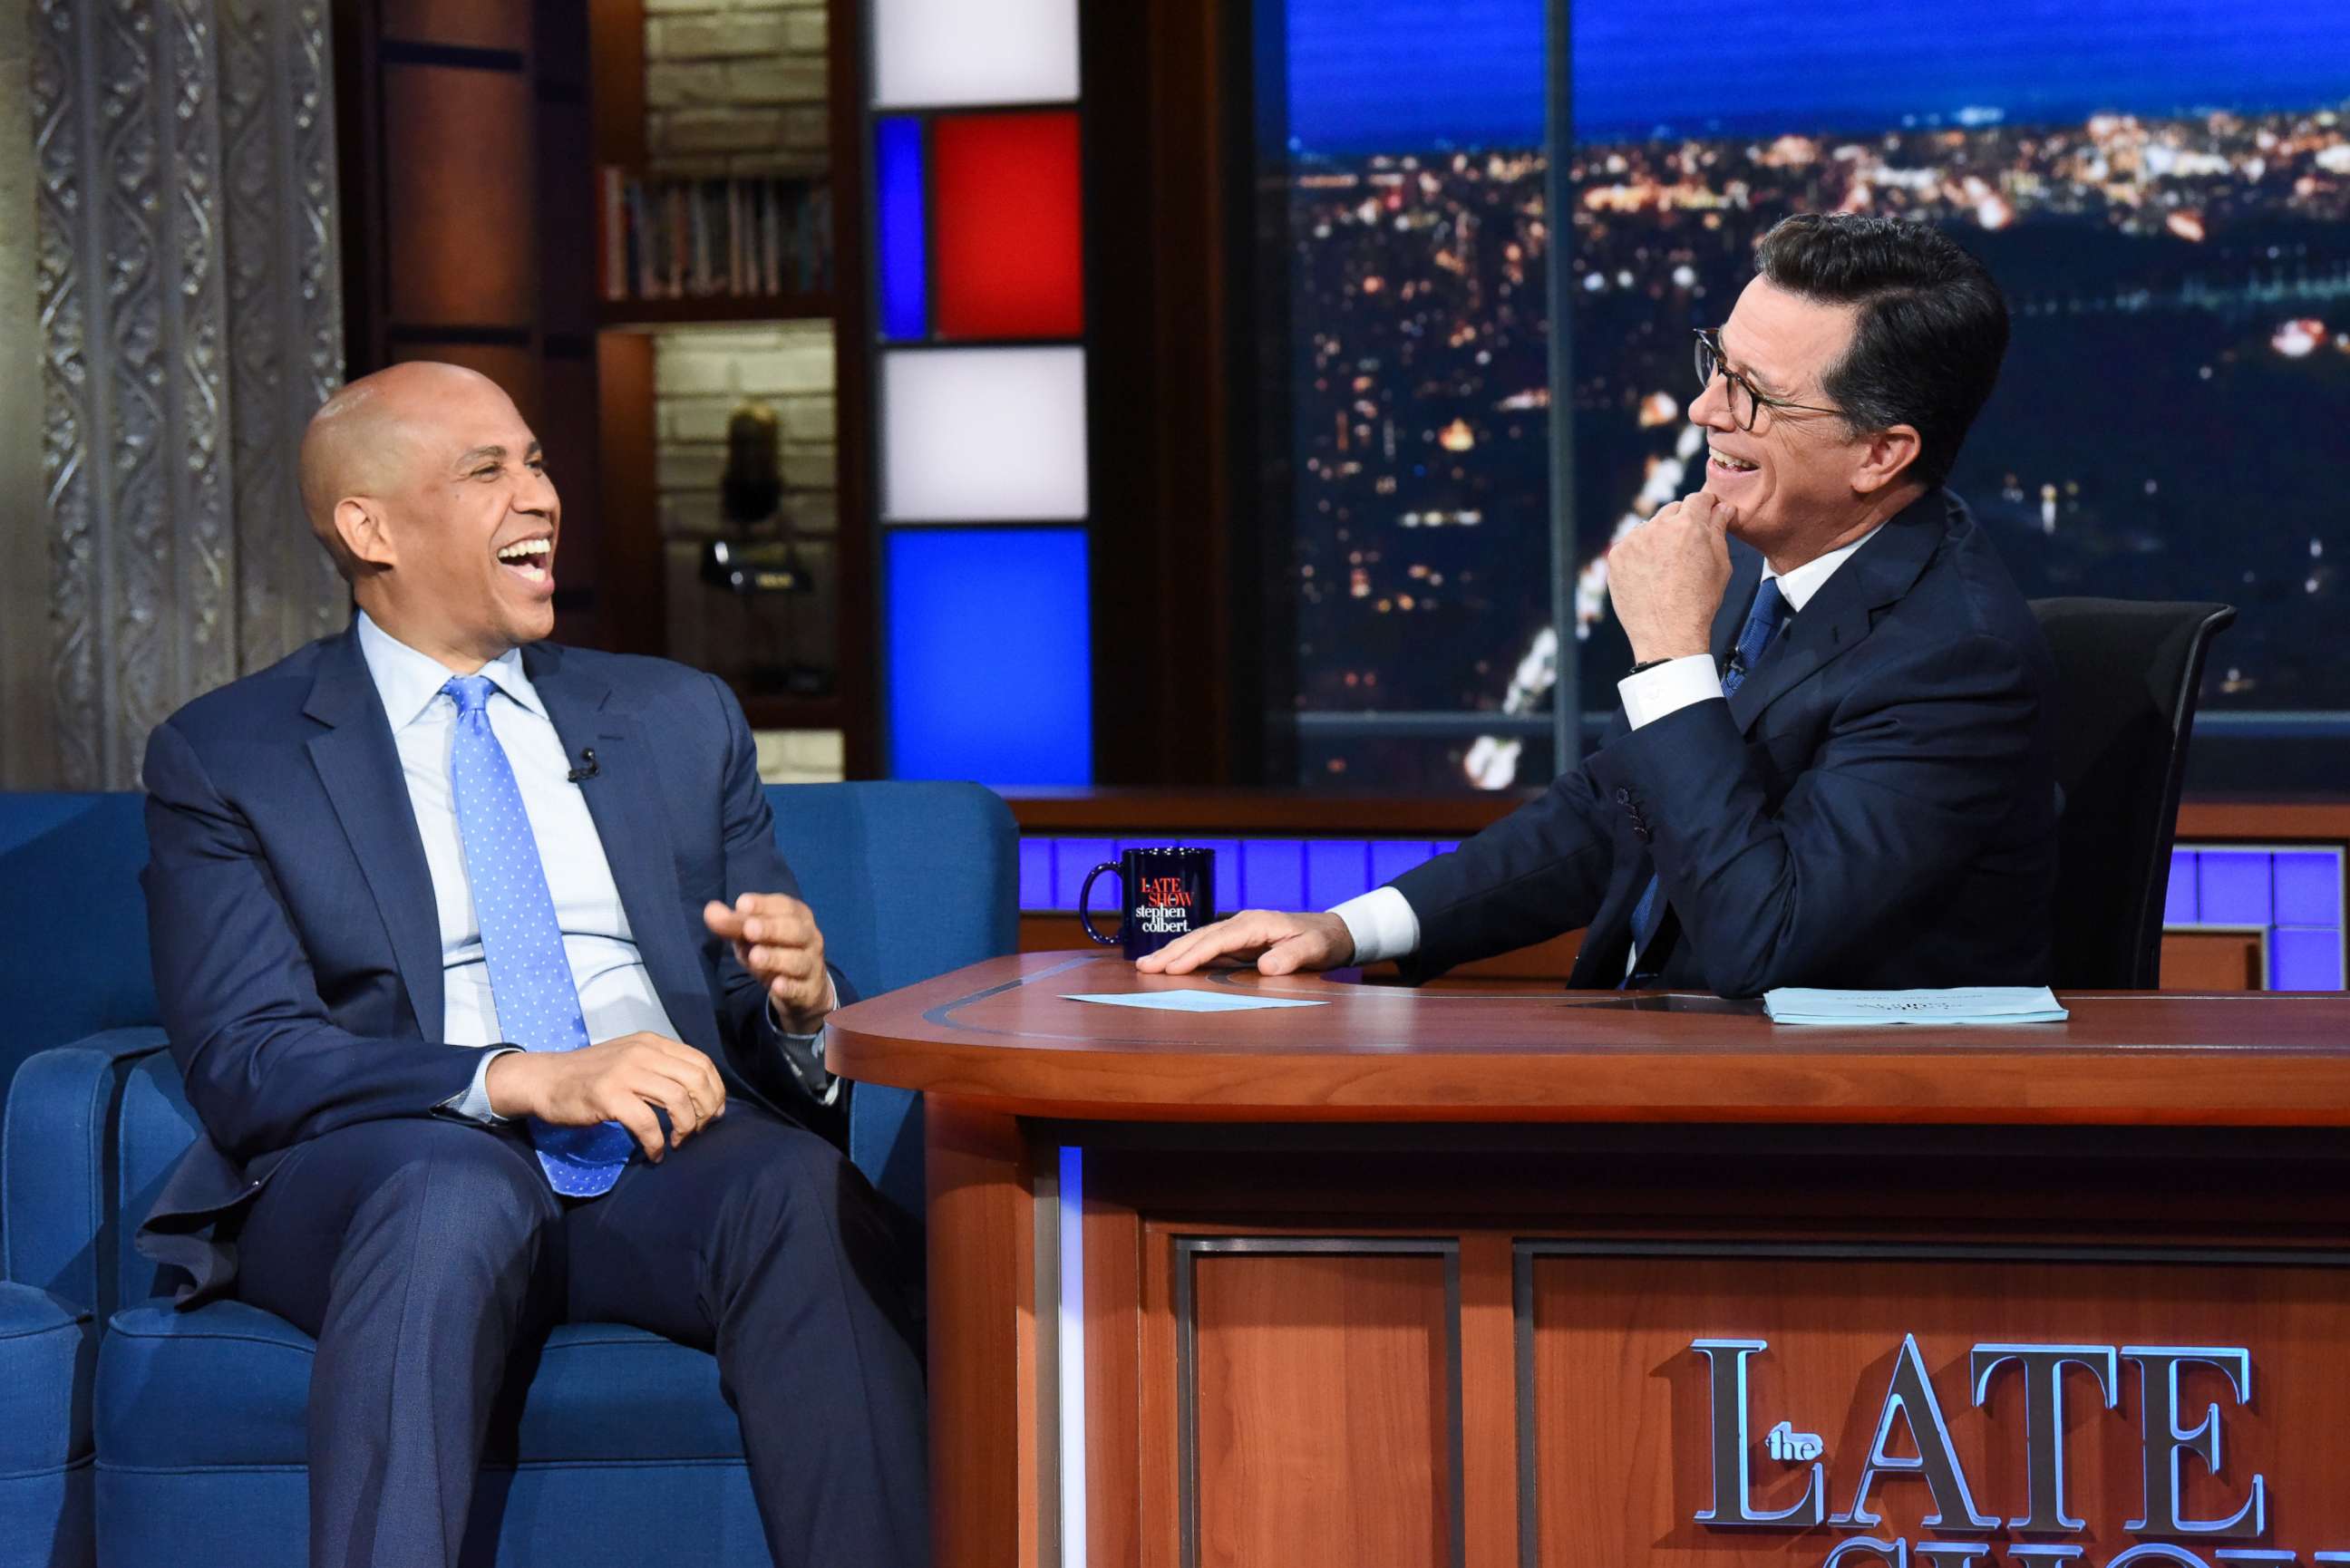 PHOTO: "The Late Show with Stephen Colbert" and guest Cory Booker during Tuesday's August 7, 2018 show.